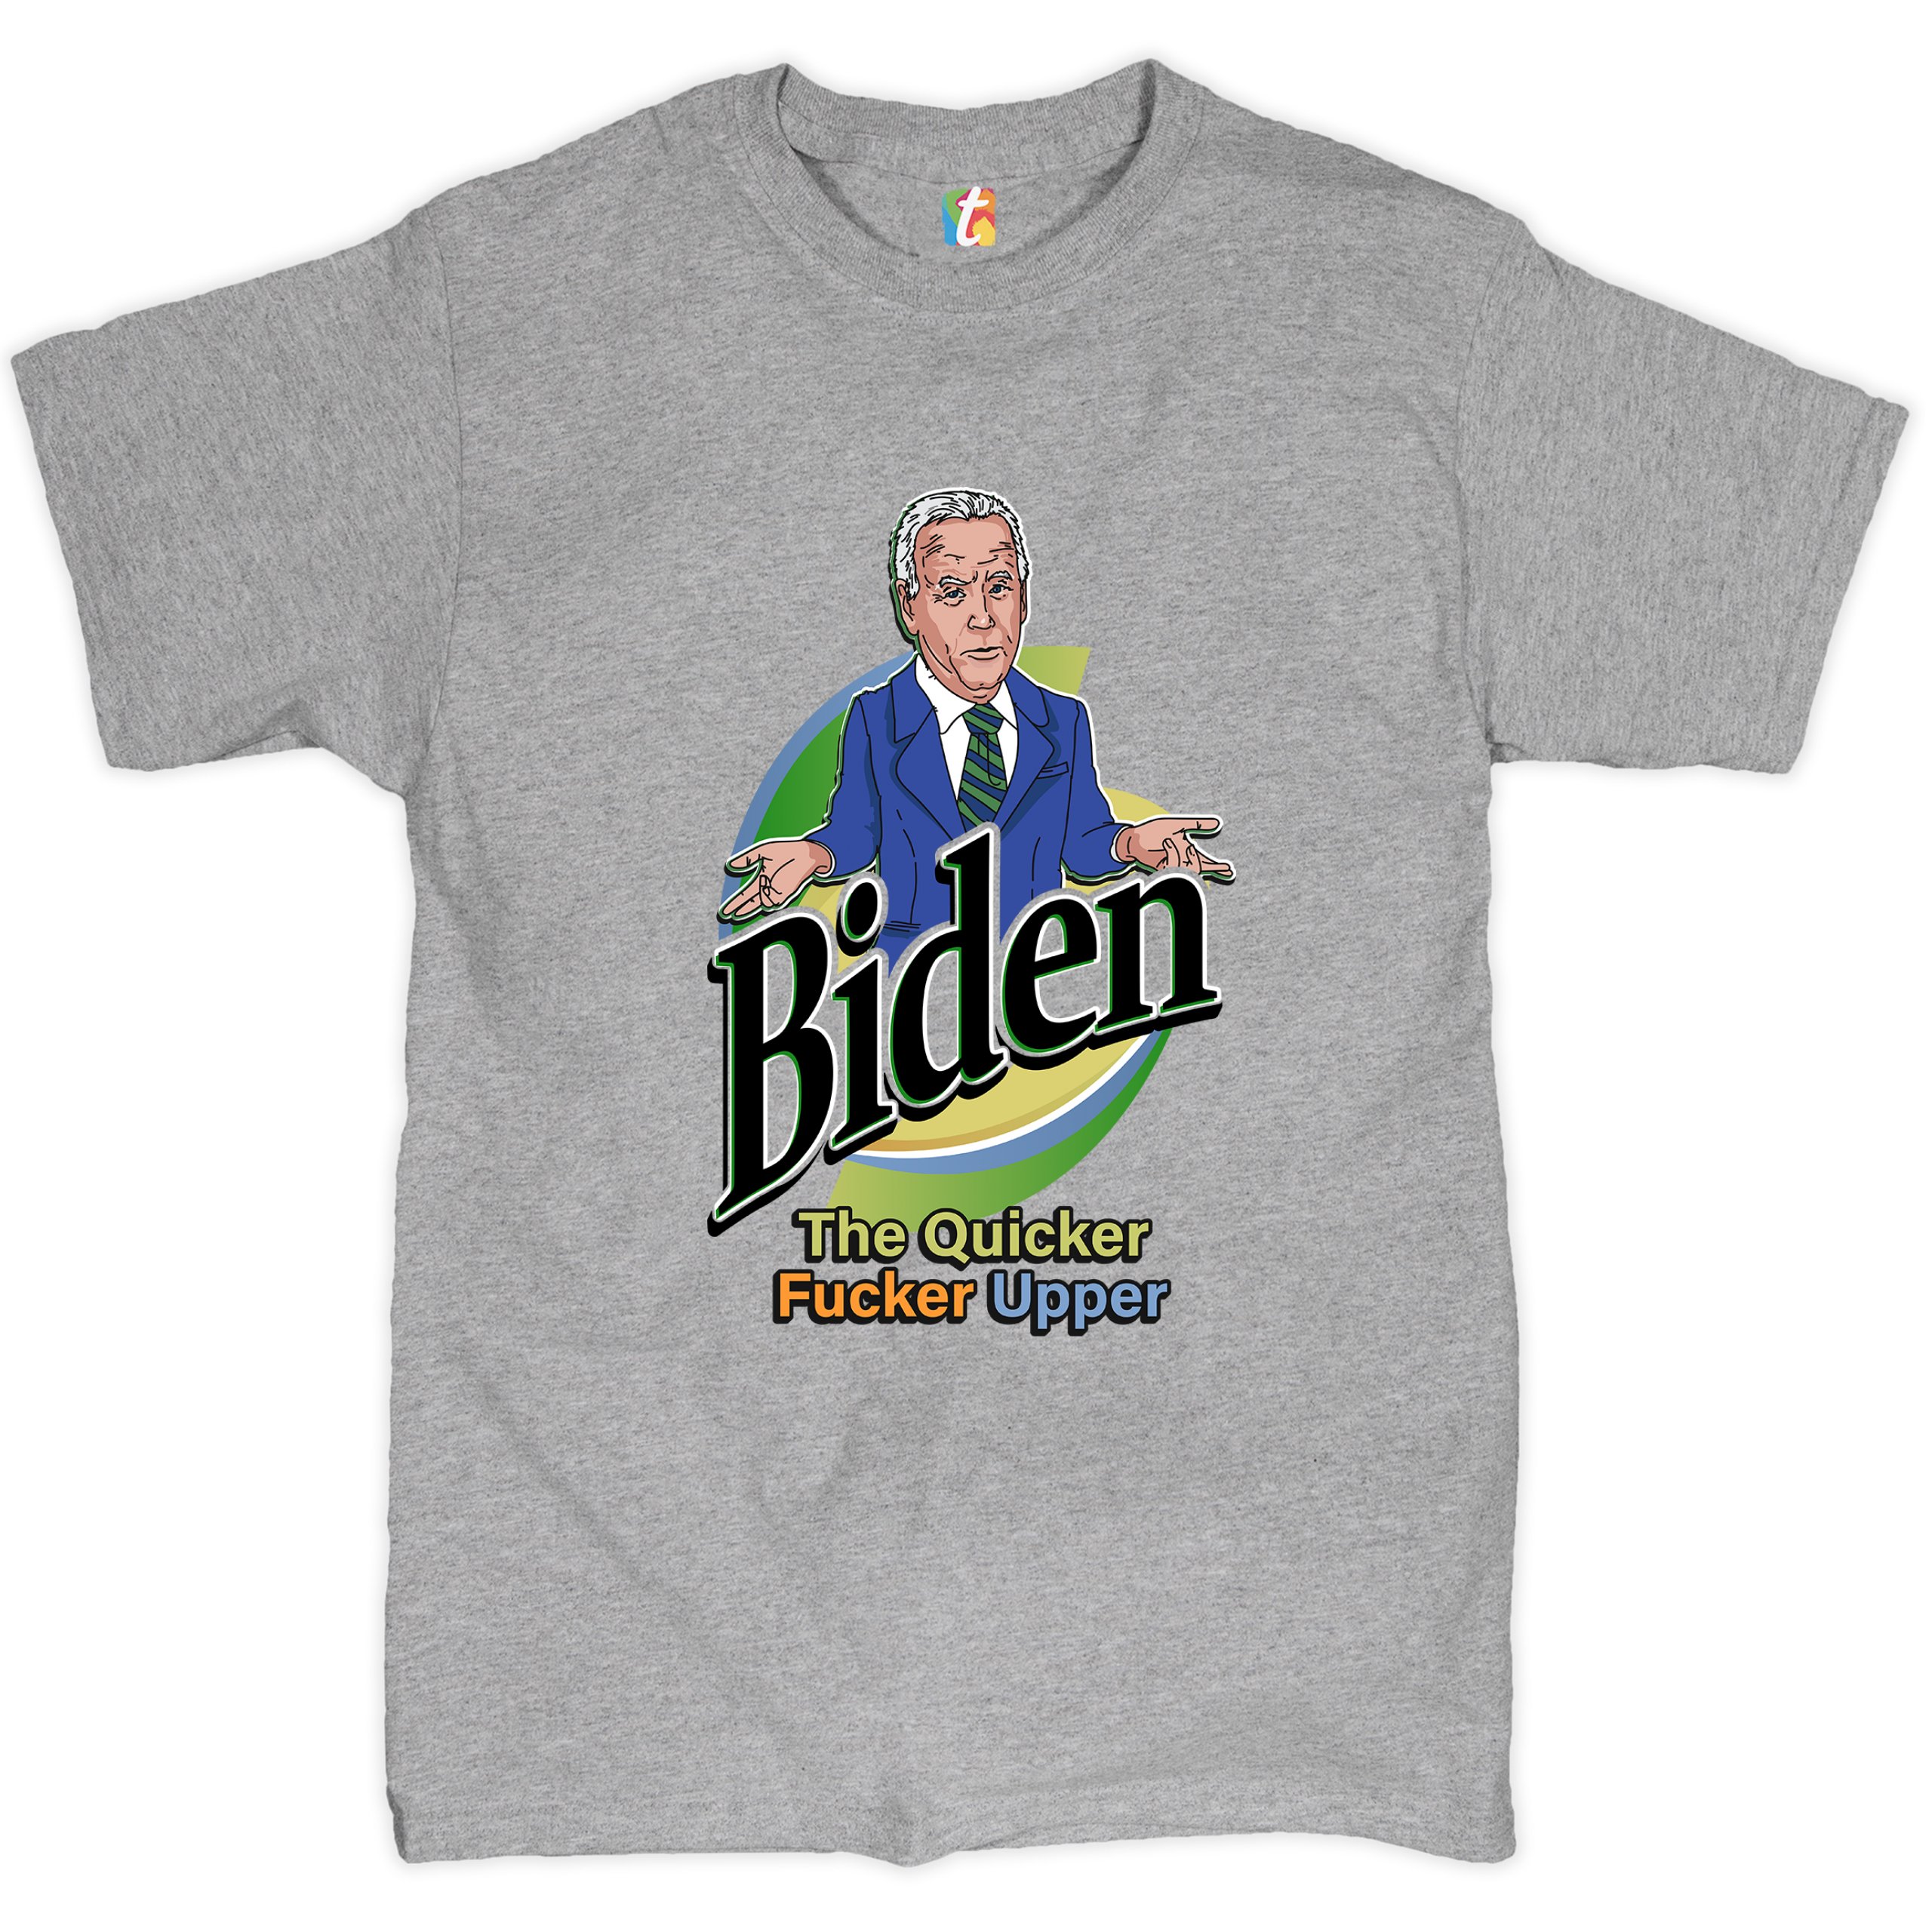 Conservative Tee Republican  Graphic Tee for Him Her Anti Biden Shirt Never Underestimates Joe's Ability to F Things Up Shirt